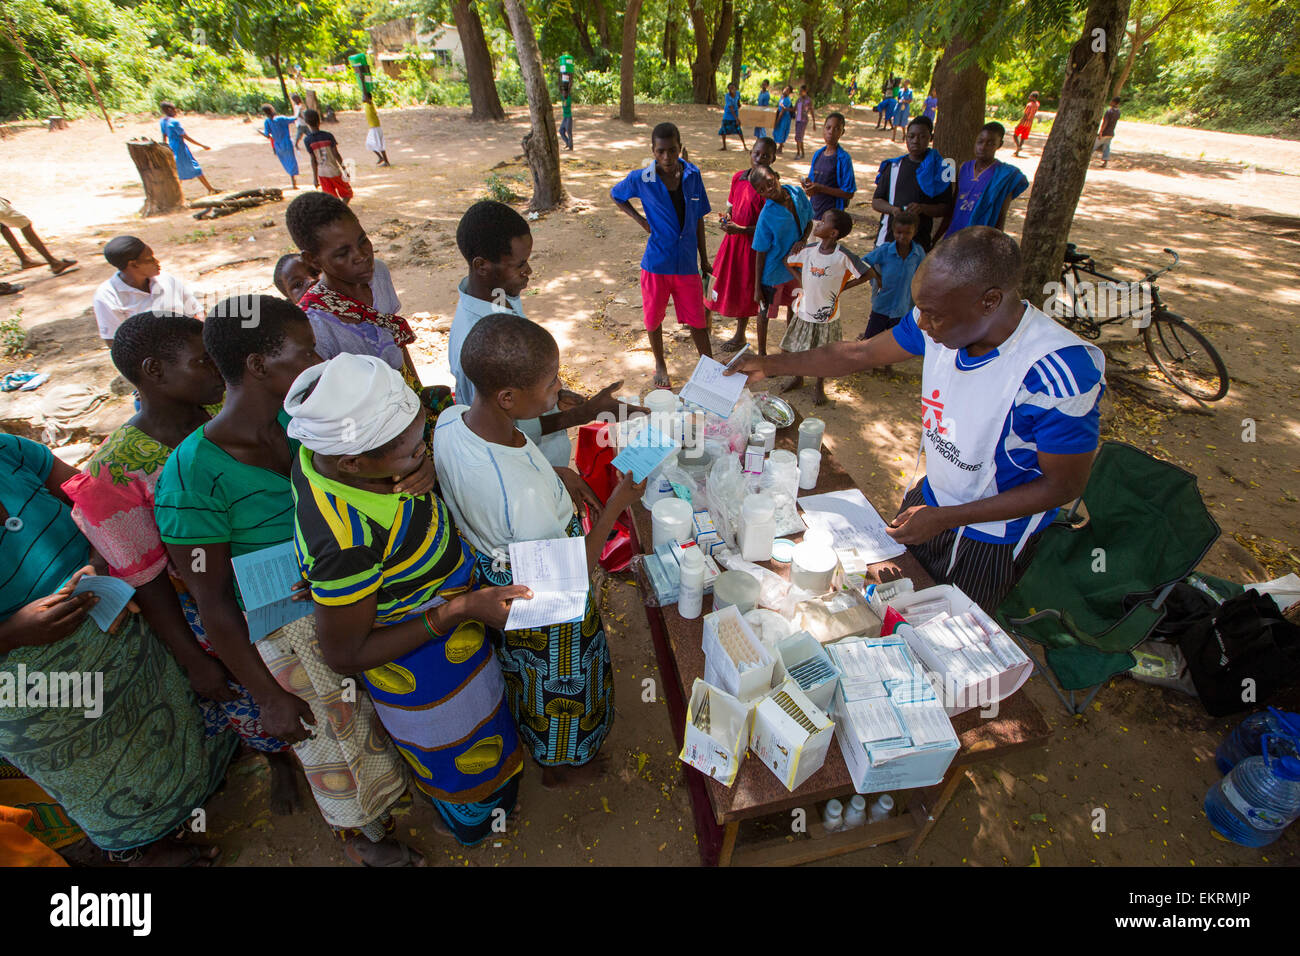 January 2015 saw a three day period of excessive rain which brought unprecedented floods to the small poor African country of Malawi. It displaced nearly quarter of a million people, devastated 64,000 hectares of land, and killed several hundred people. This shot shows A Medicin Sans Frontieres clinic in Makhanga providing Malaria treatment drugs to local people, many of whom now have malaria, as a result of the drying up flood waters providing ideal breeding grounds for mosquitoes. Stock Photo